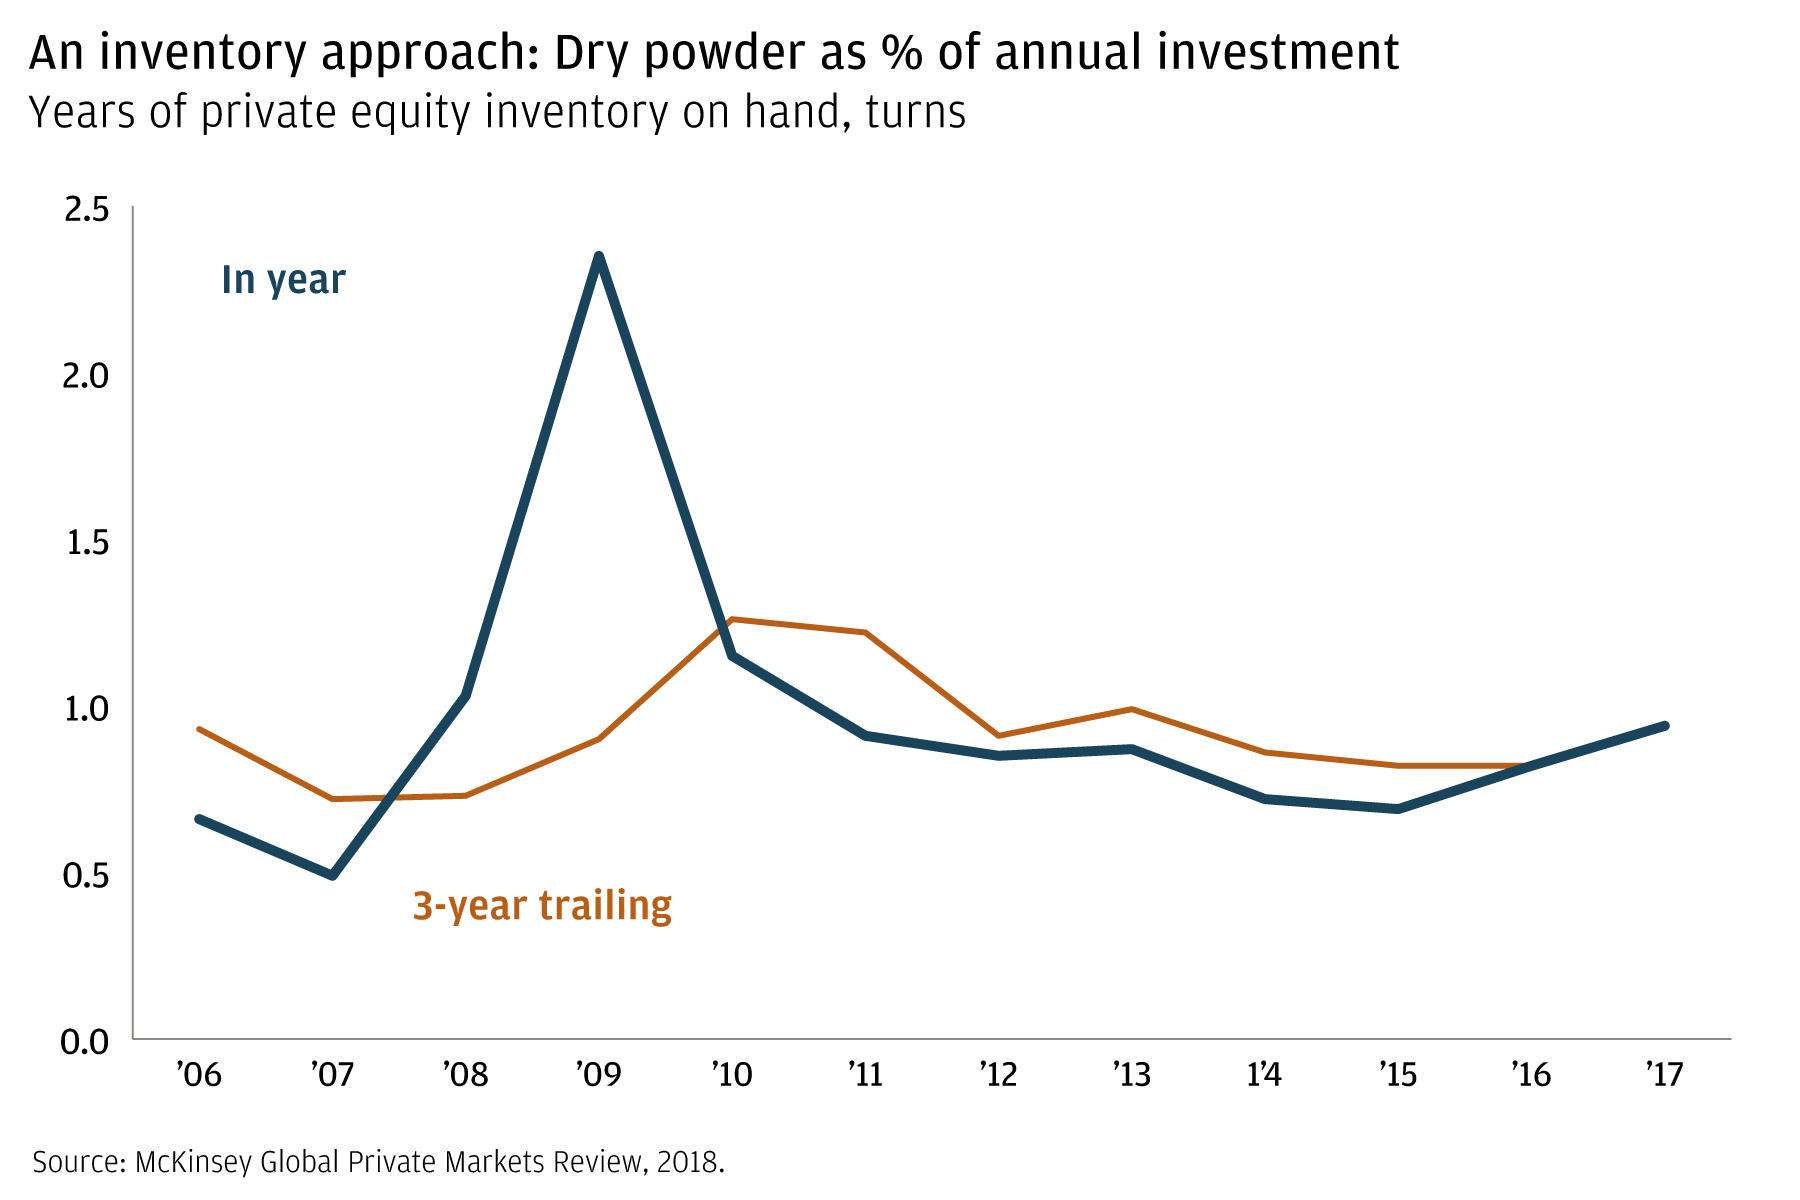 Two-line chart showing dry powder as a percentage of annual investment by year, on both an in-year and a three-year trailing basis, 2008–2017